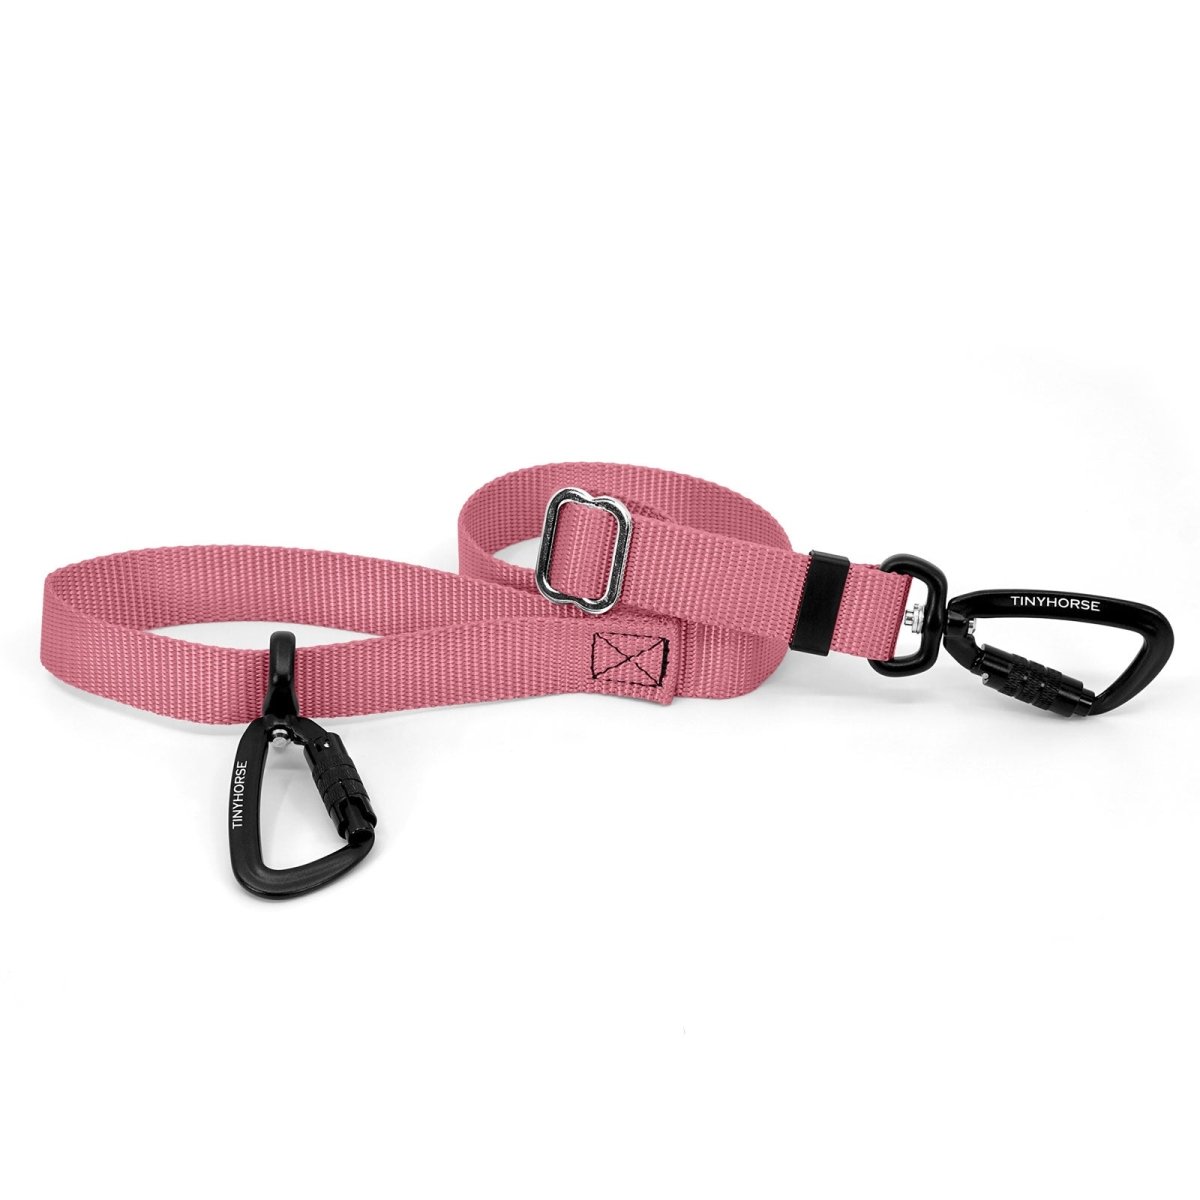 A baby pink-coloured Lead-All Lite with an adjustable nylon webbing leash and 2 auto-locking carabiners